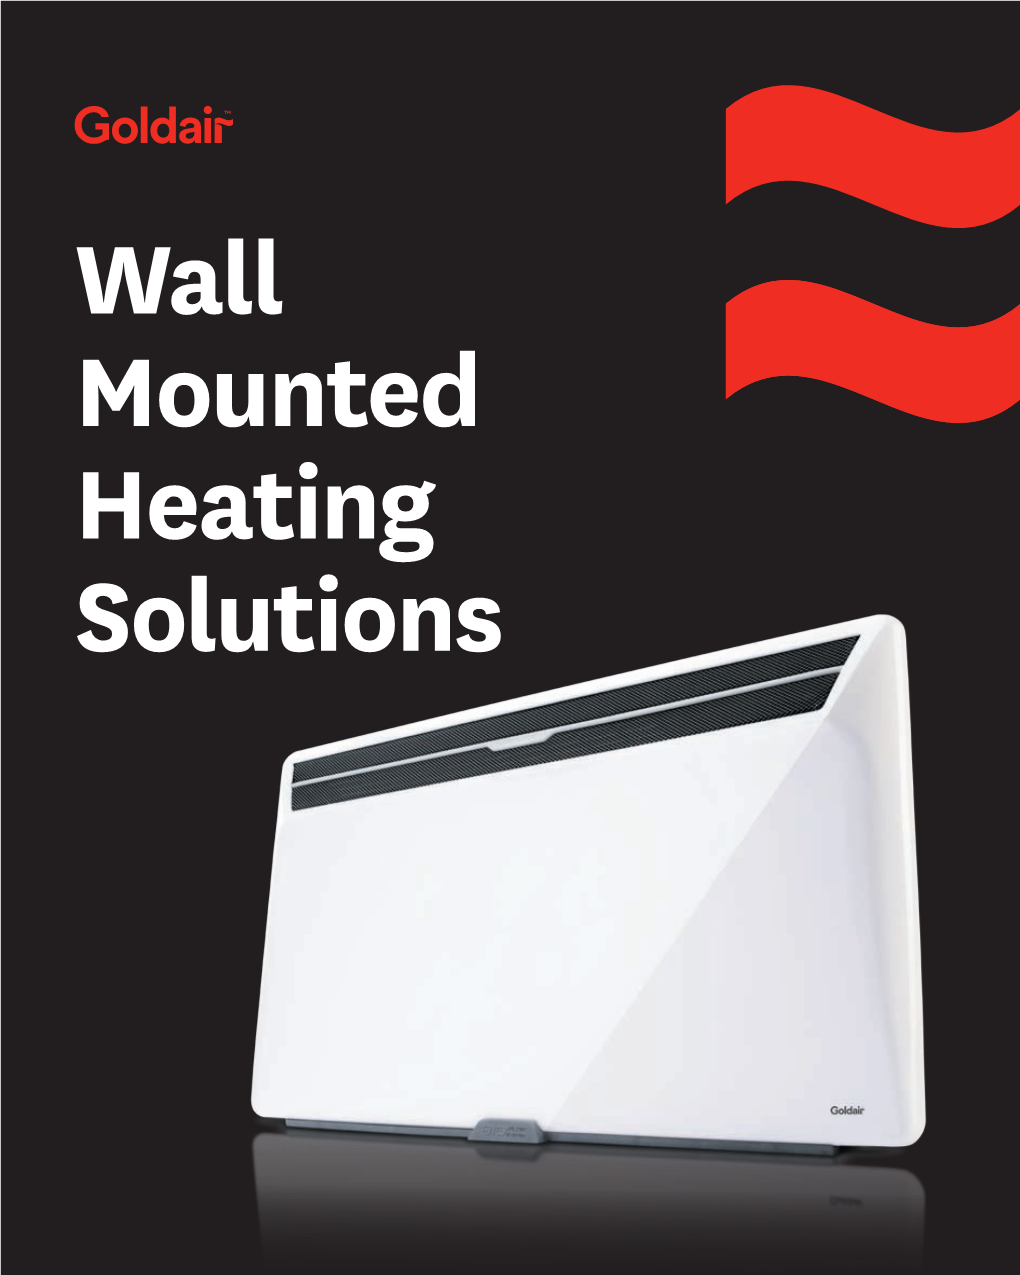 Wall Mounted Heating Solutions for More Than 40 Years Goldair Has Been the Leading Name Behind Heating Solutions That People Love and Trust in Their Homes